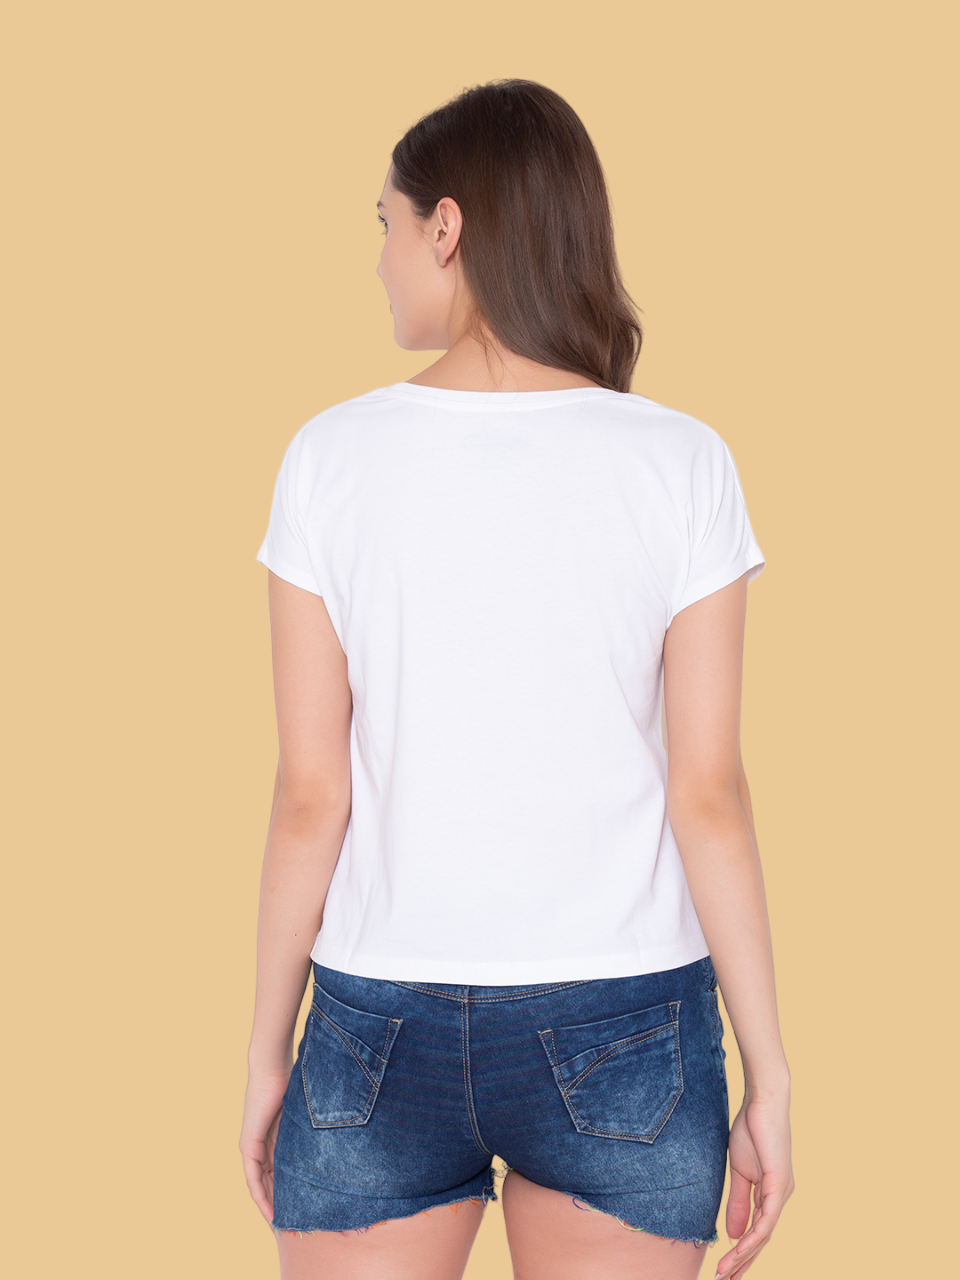 Flawless Women's 100% Cotton T-Shirt in Classic White Being Flawless